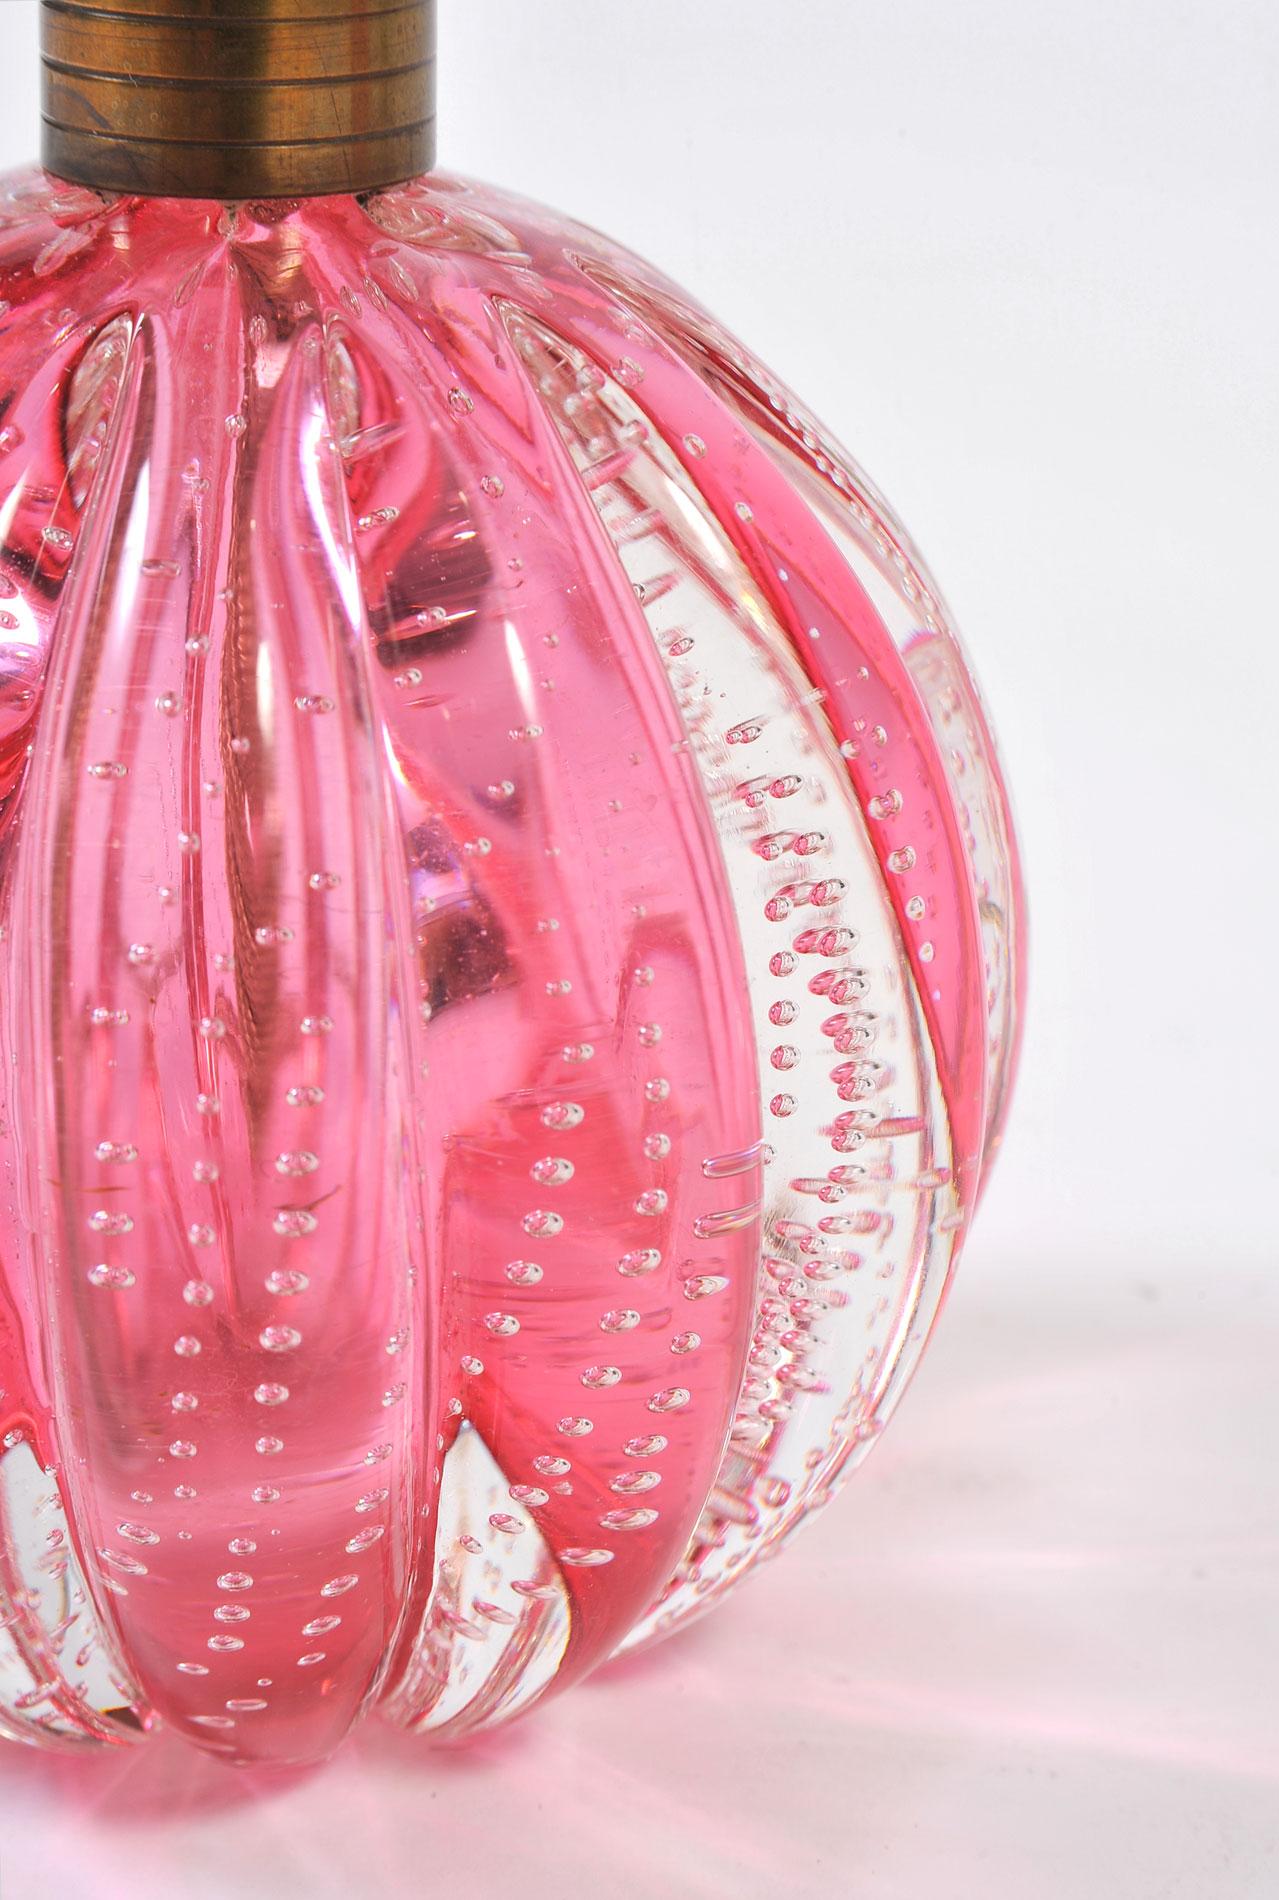 Pink and clear Murano Italian glass ball lamps infused with tiny bubbles. Shaped with ribbed sides to enhance the dimensions.
  